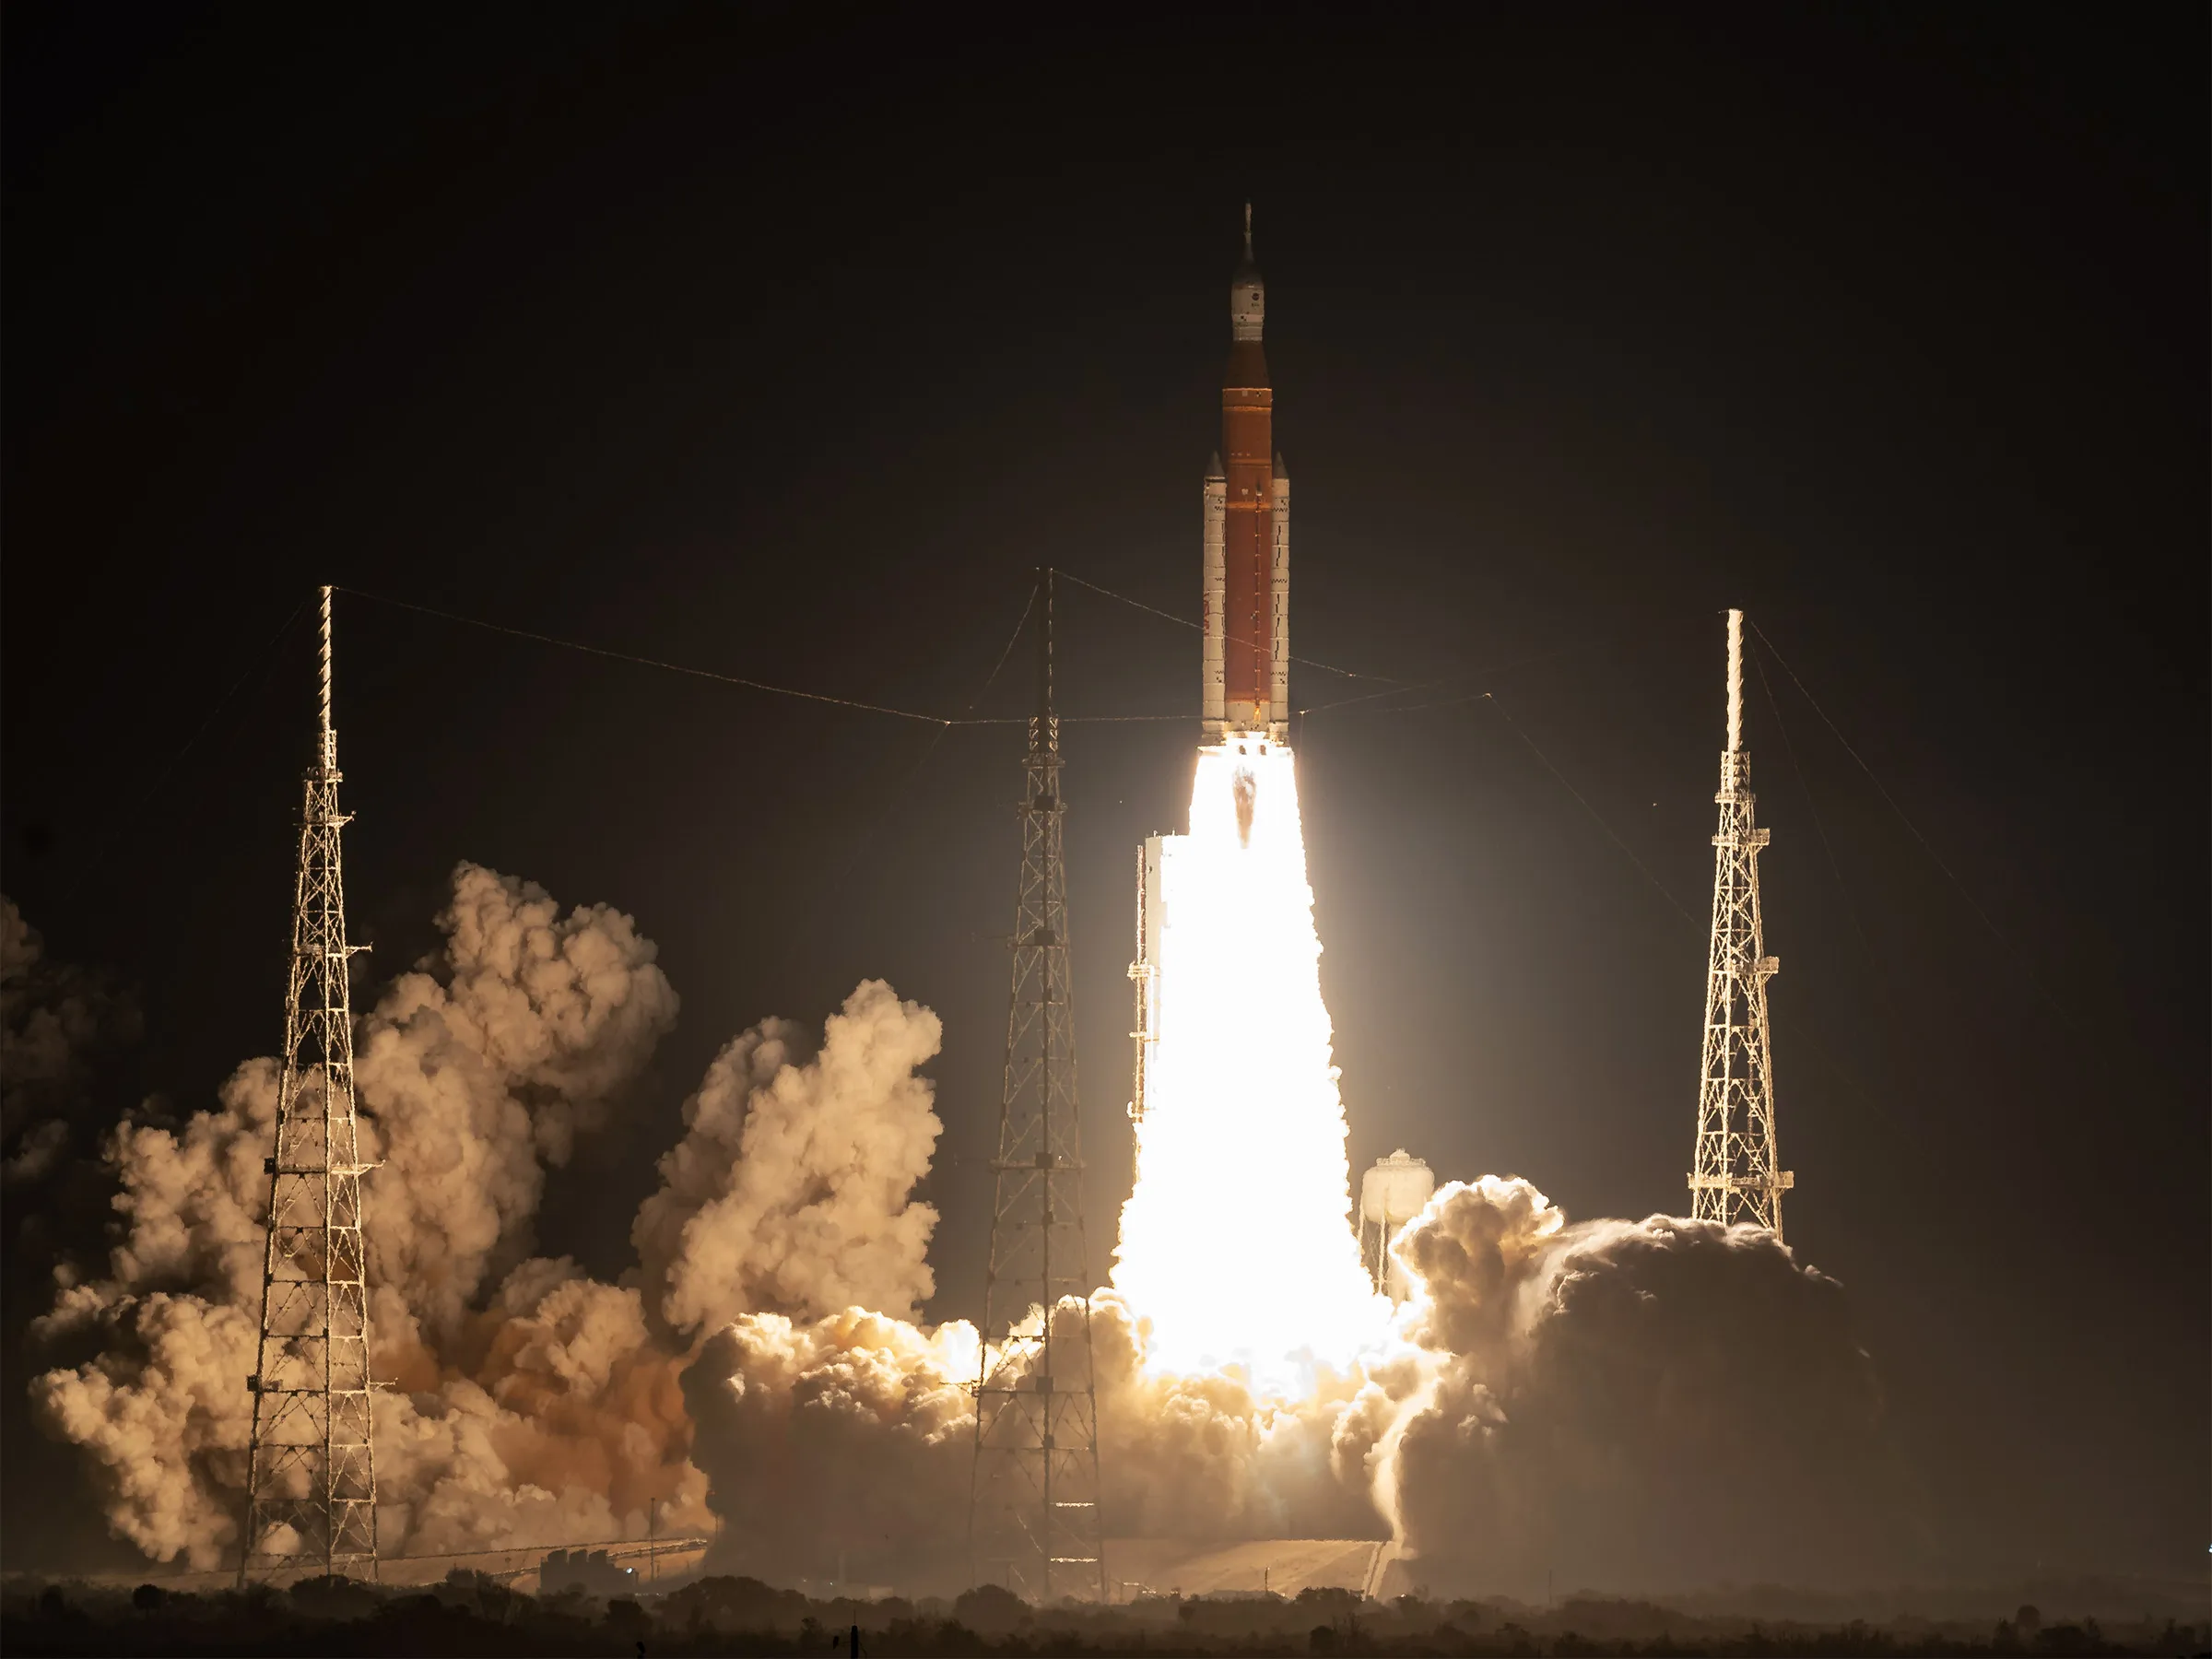 The Launch of Artemis 1: A New Era of Space Exploration